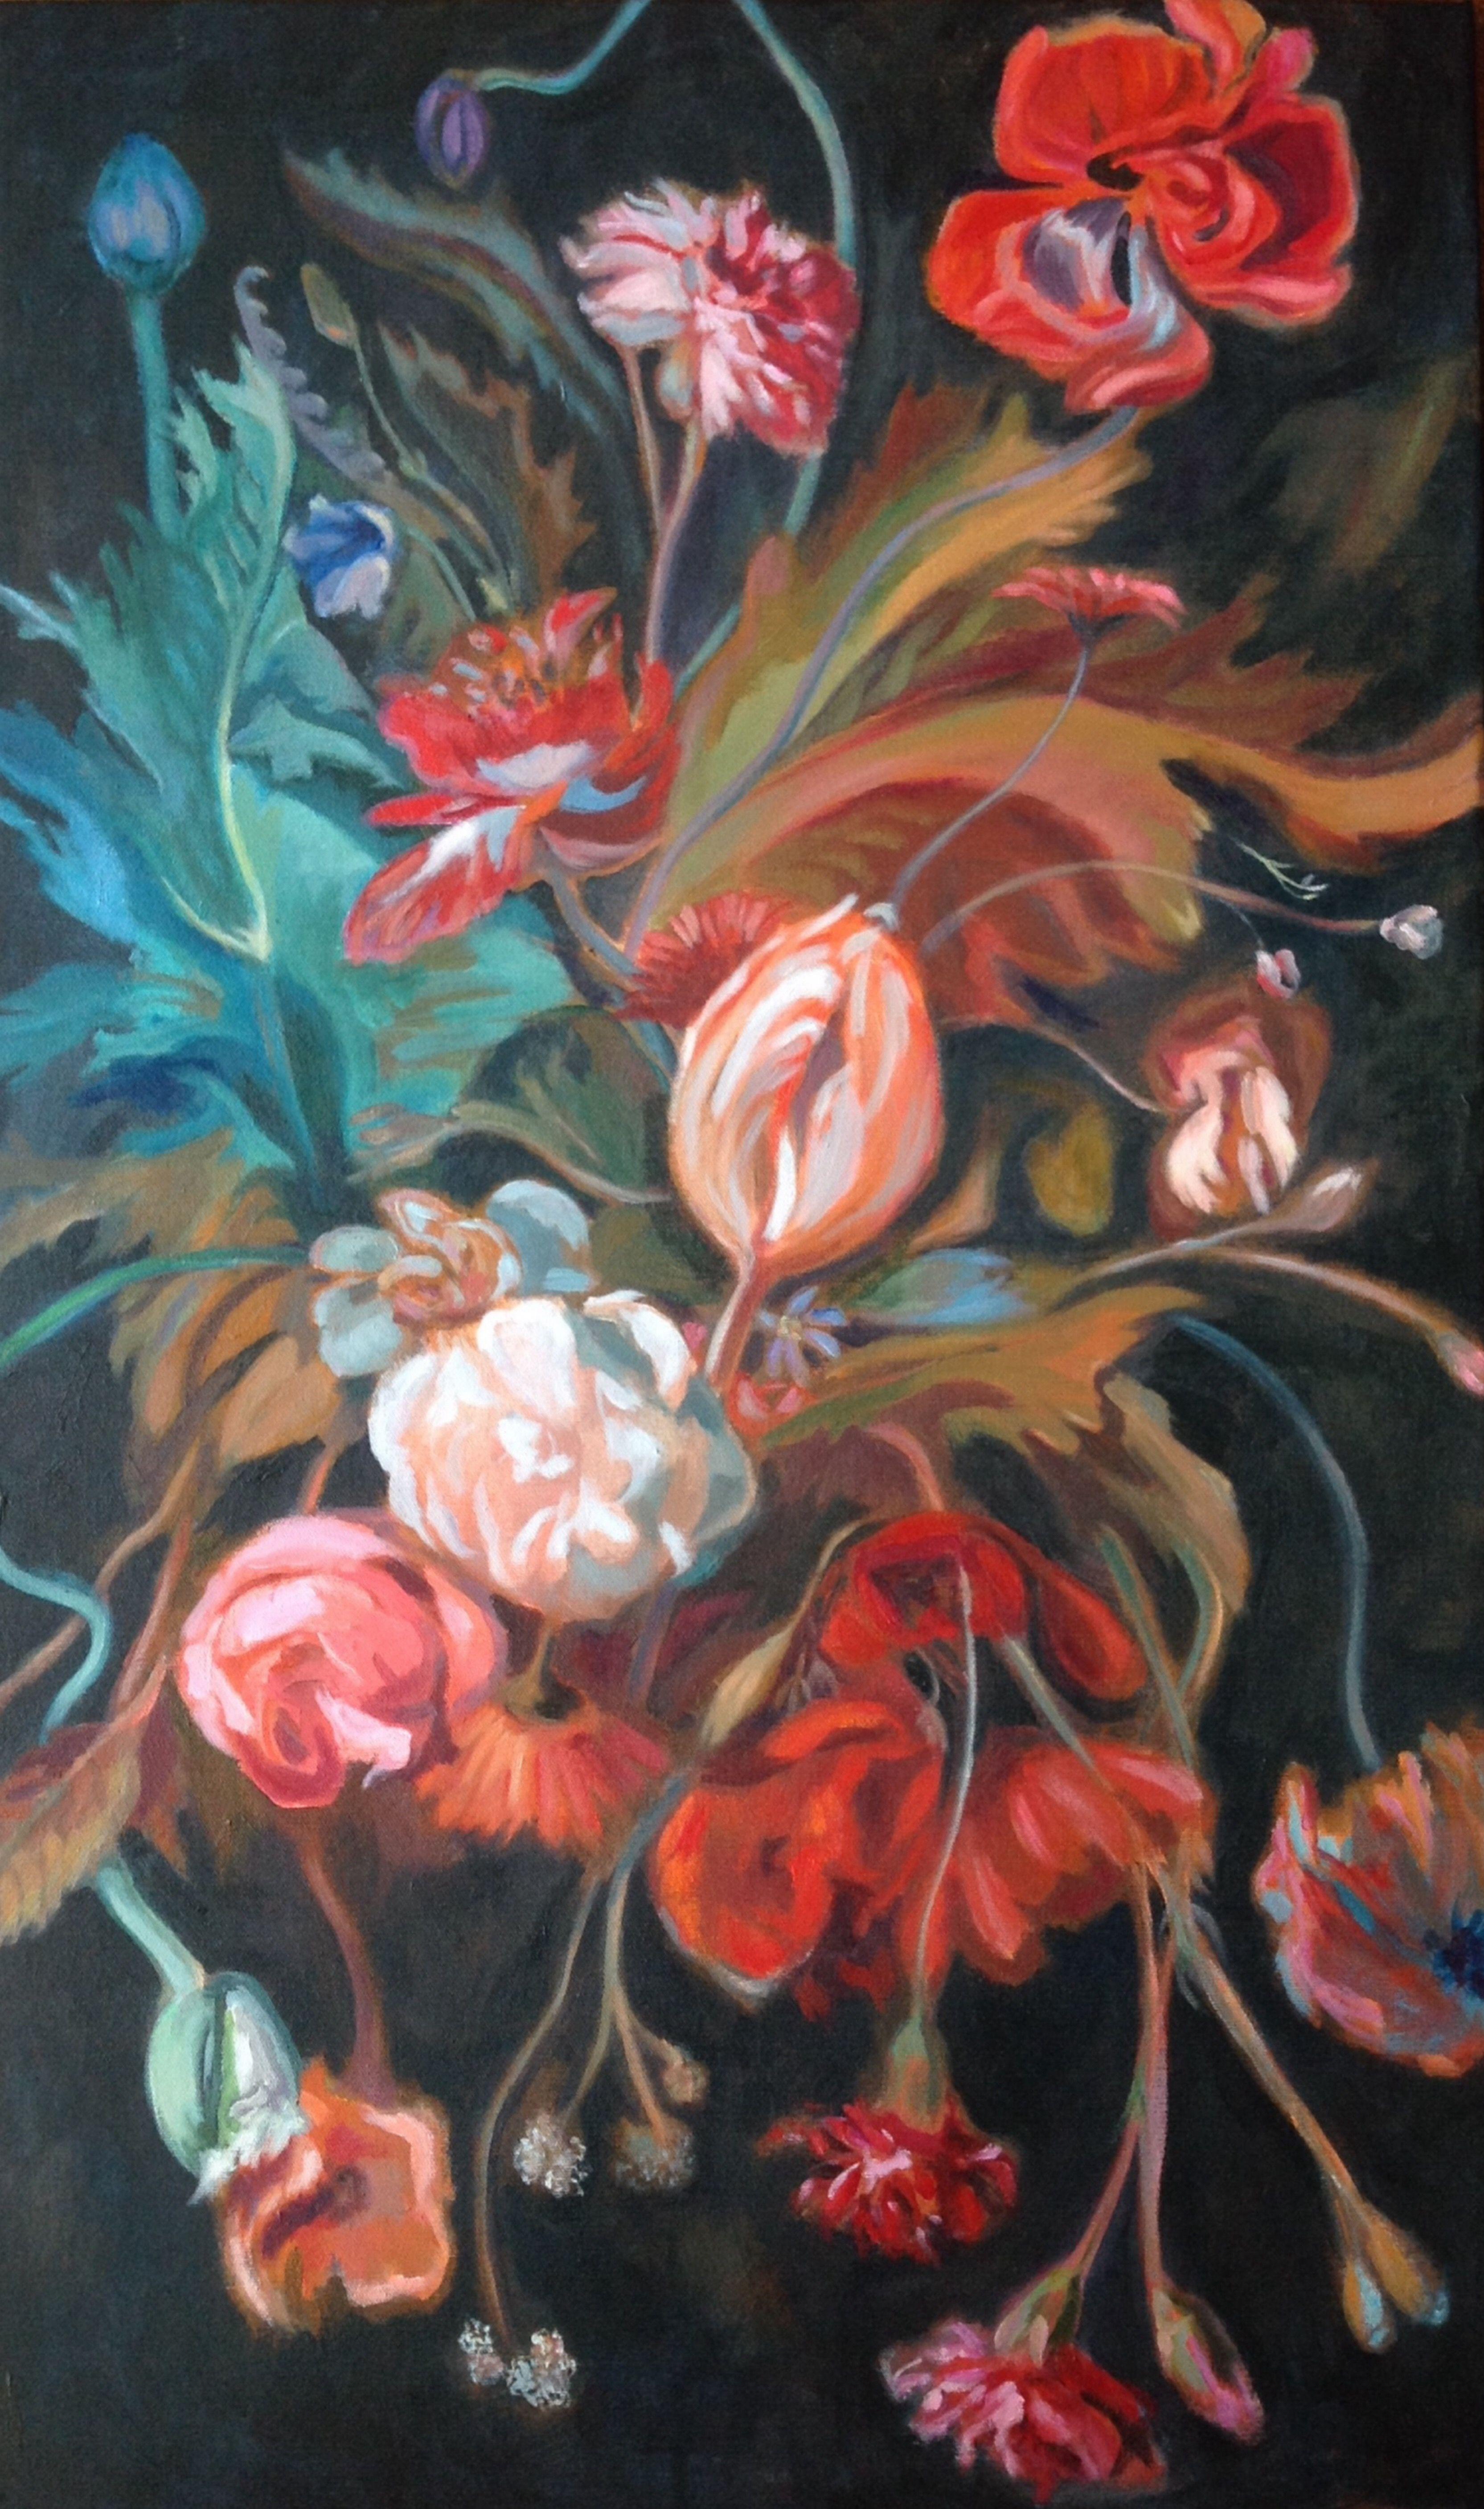 Acrylic on unmounted canvas. She admires old dutch masters paintings of flowers and decided to do a bouquet of flowers "Ã  la maniÃ¨re" of these. She had great fun working on this piece, many of the flowers are invented or imagined. :: Painting ::